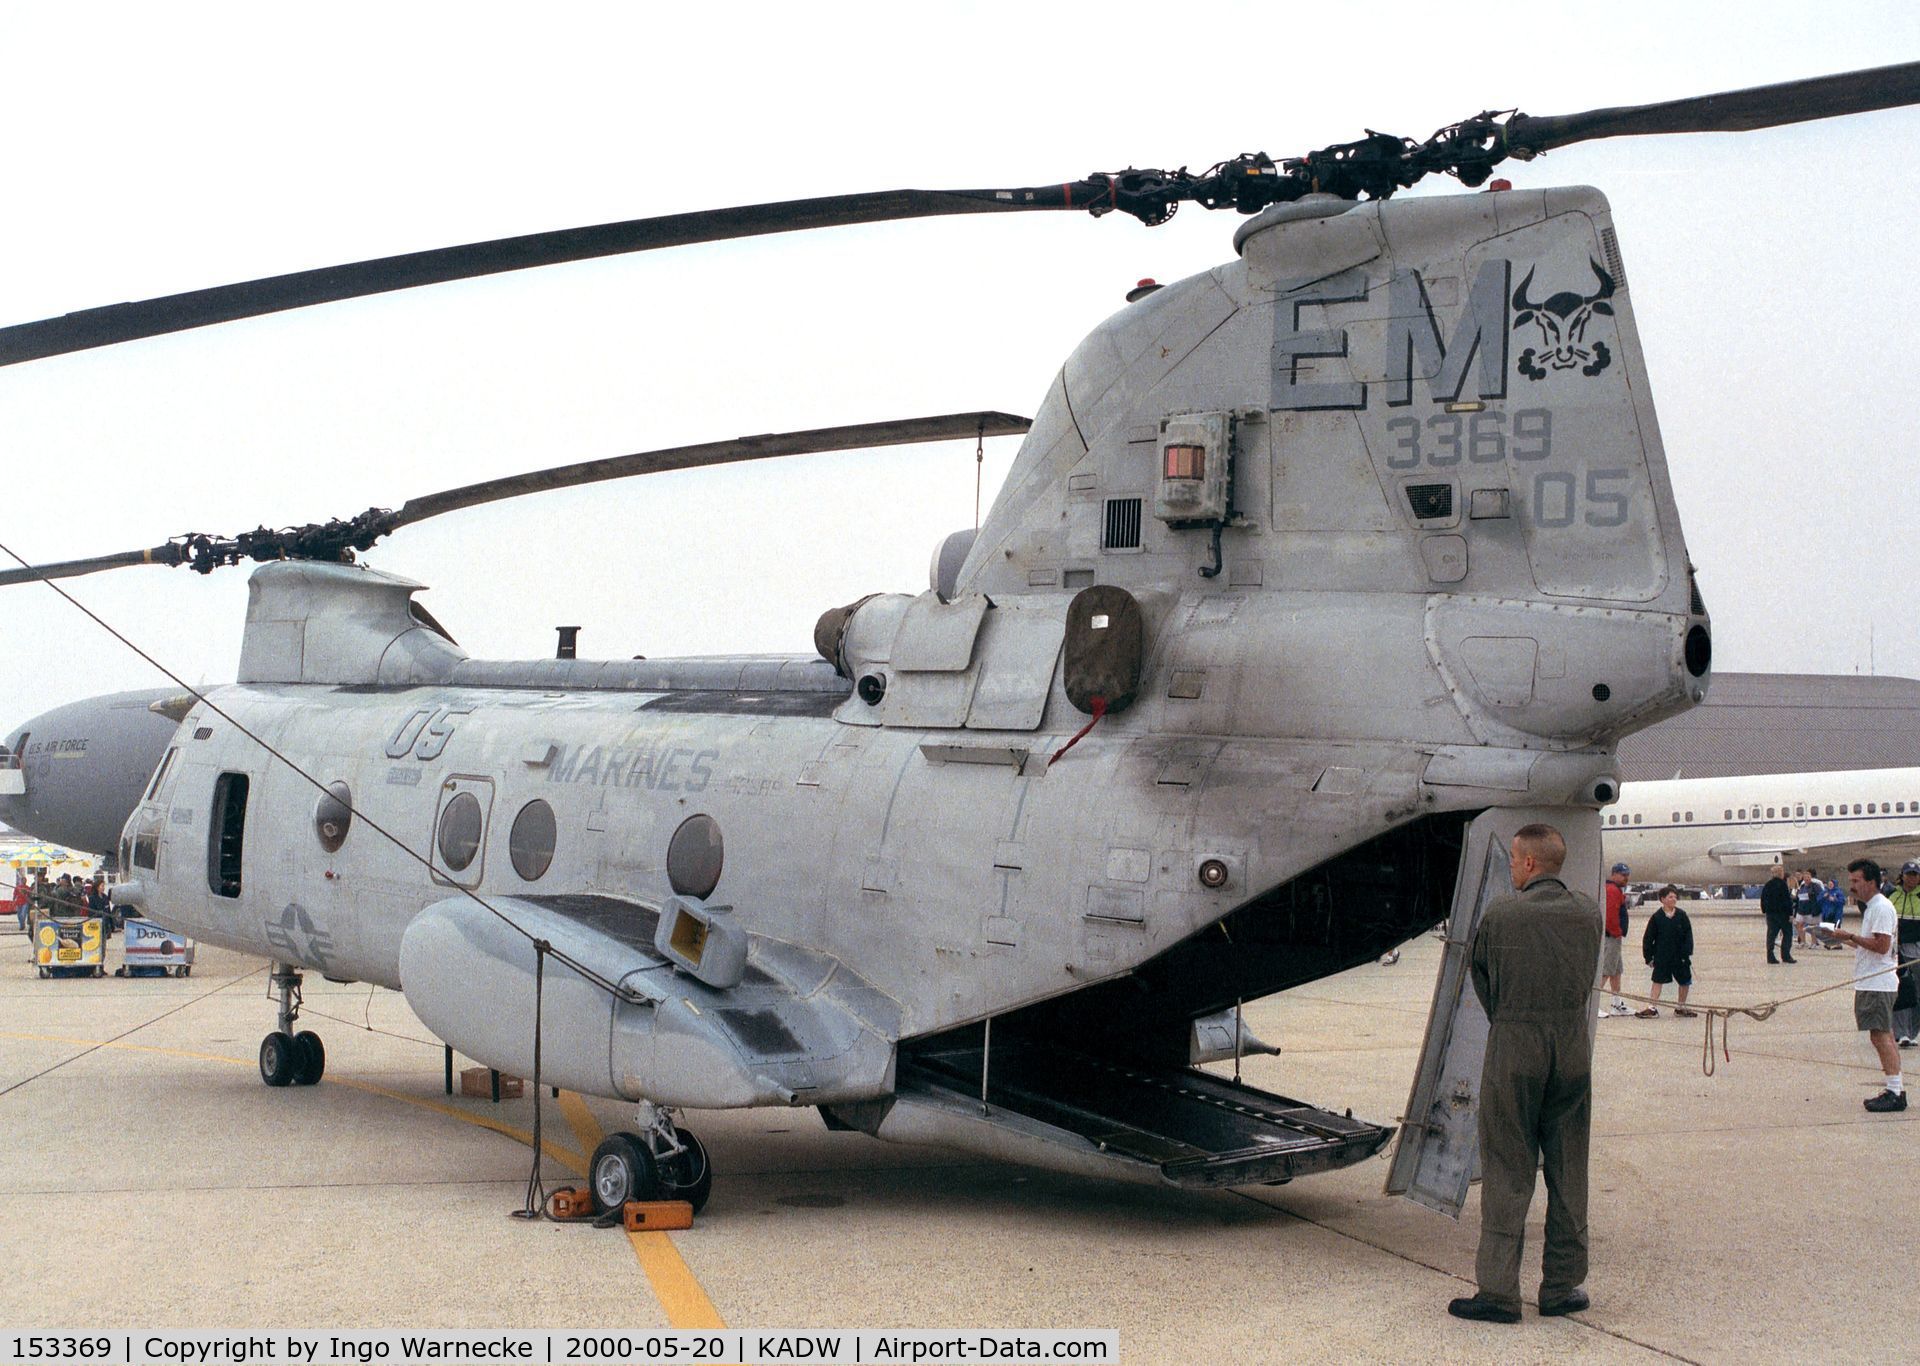 153369, Boeing Vertol CH-46E Sea Knight C/N 2265, Boeing Vertol CH-46E Sea Knight of the USMC at Andrews AFB during Armed Forces Day